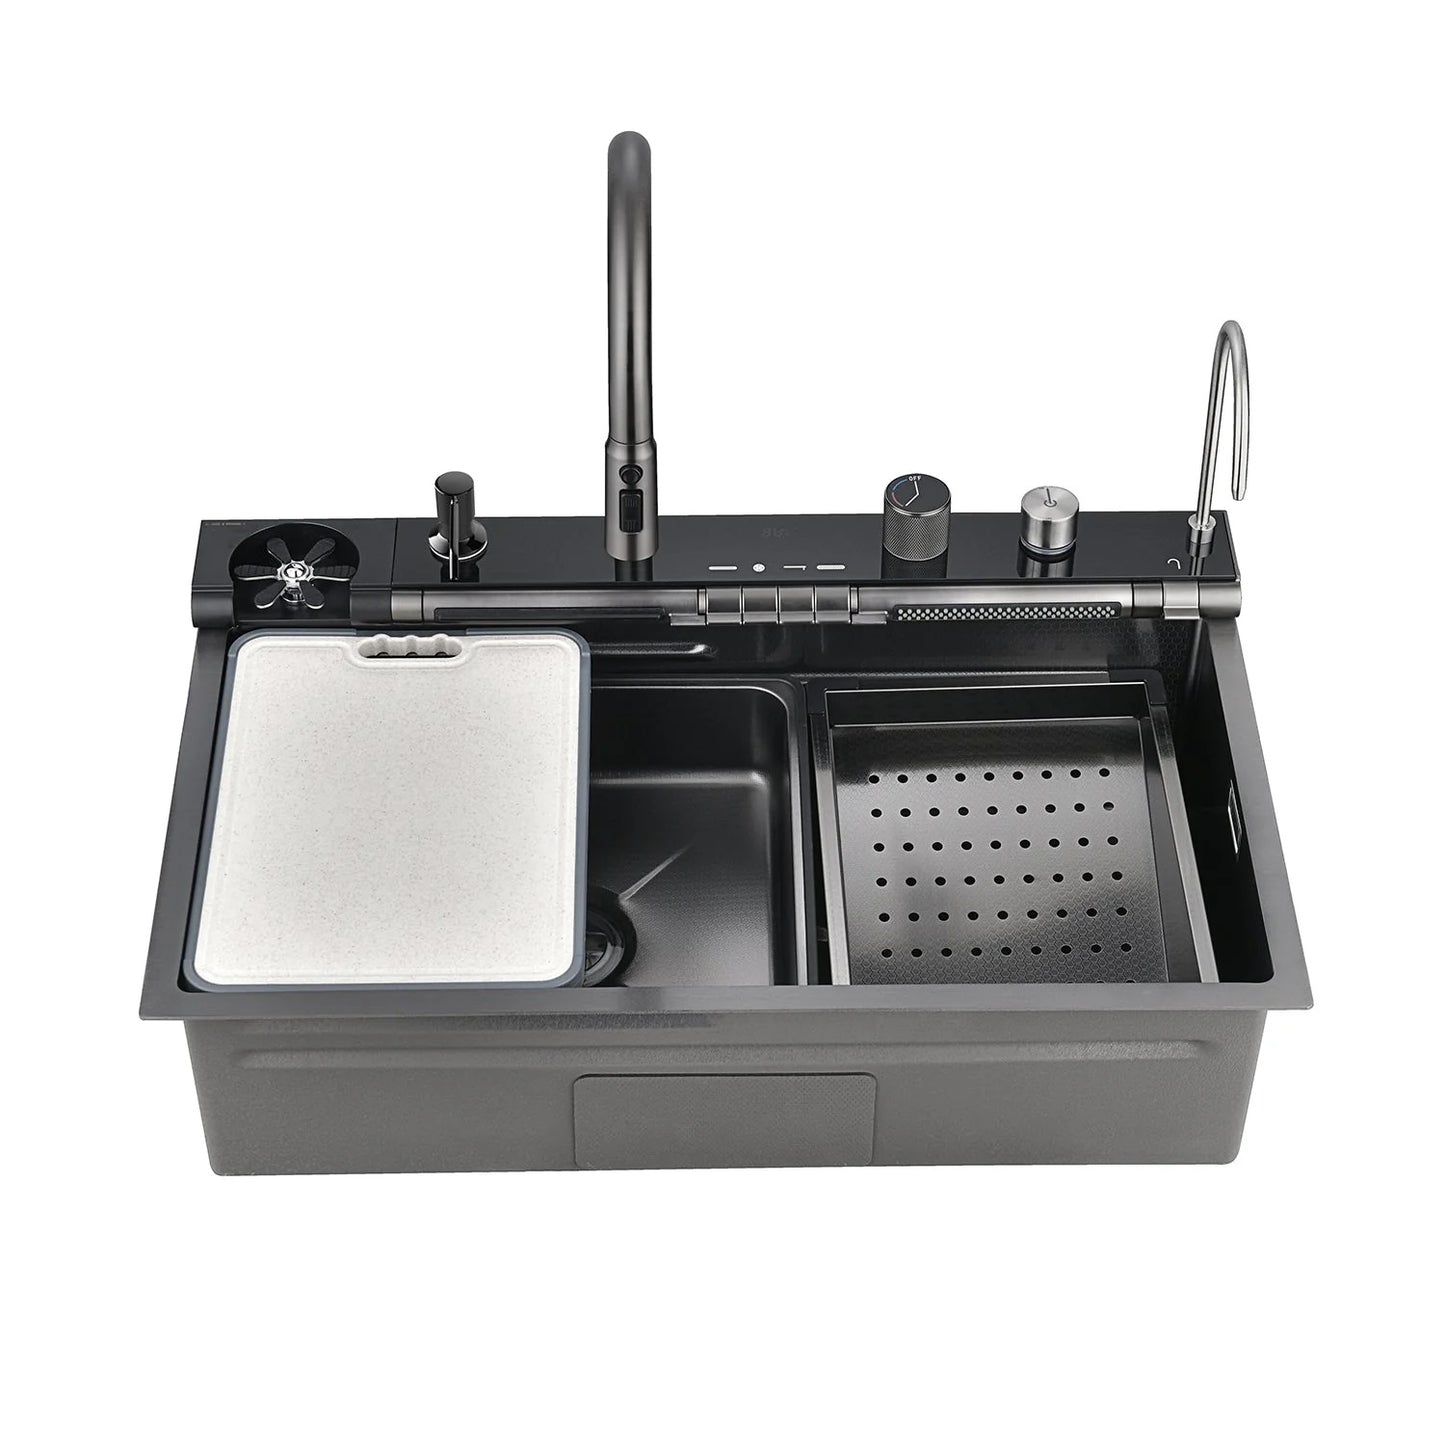 Multifunctional-deep-kitchen-sink-with-Multifunctional-mixing-system-TETRA-SINK-24BS304R75-22